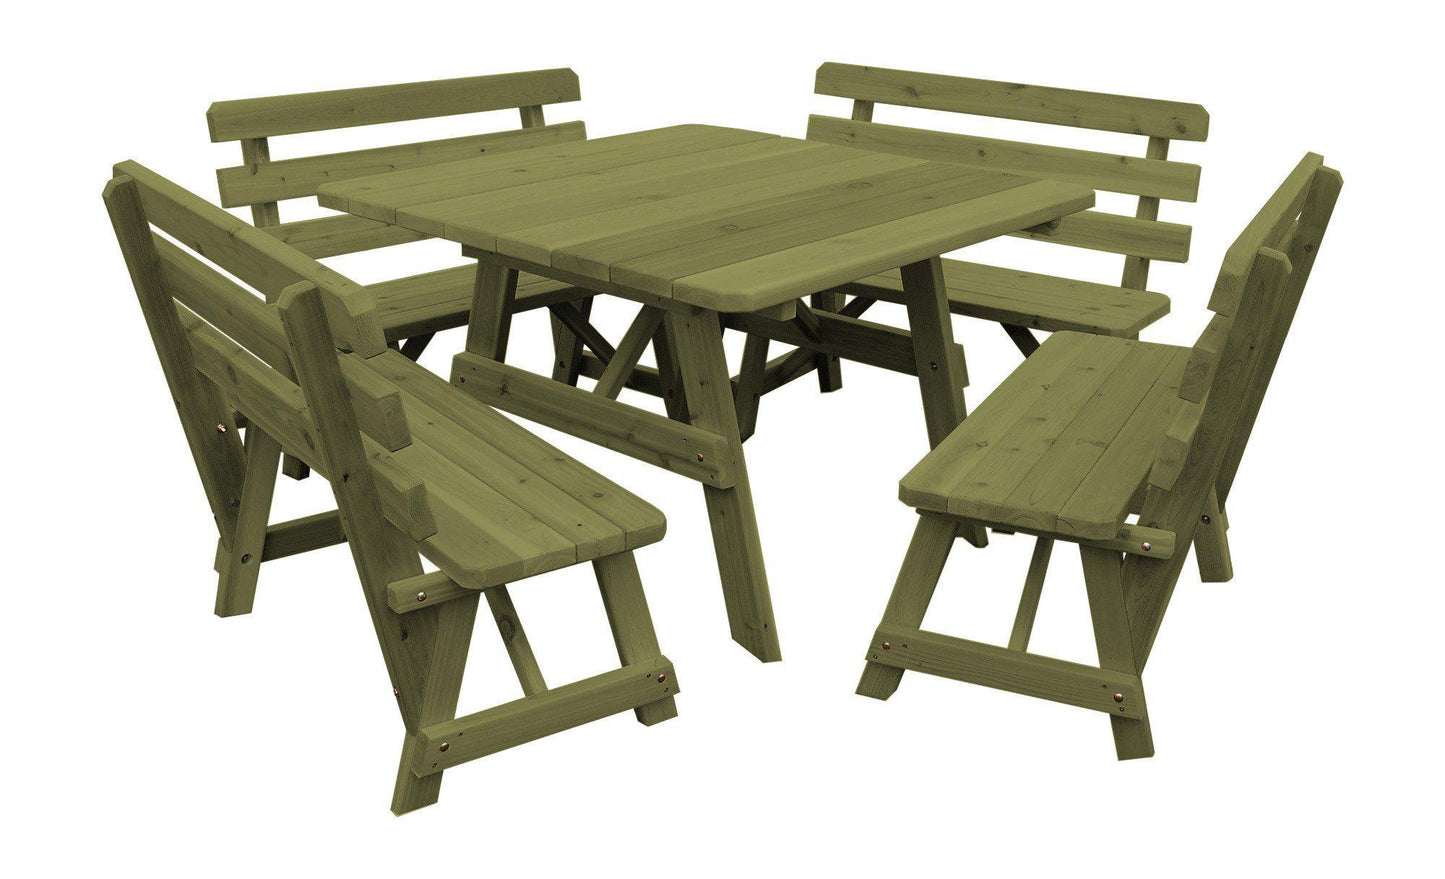 A&L FURNITURE CO. Western Red Cedar 43" Square Table w/ 4 Backed Benches- Specify for FREE 2" Umbrella Hole - LEAD TIME TO SHIP 2 WEEKS